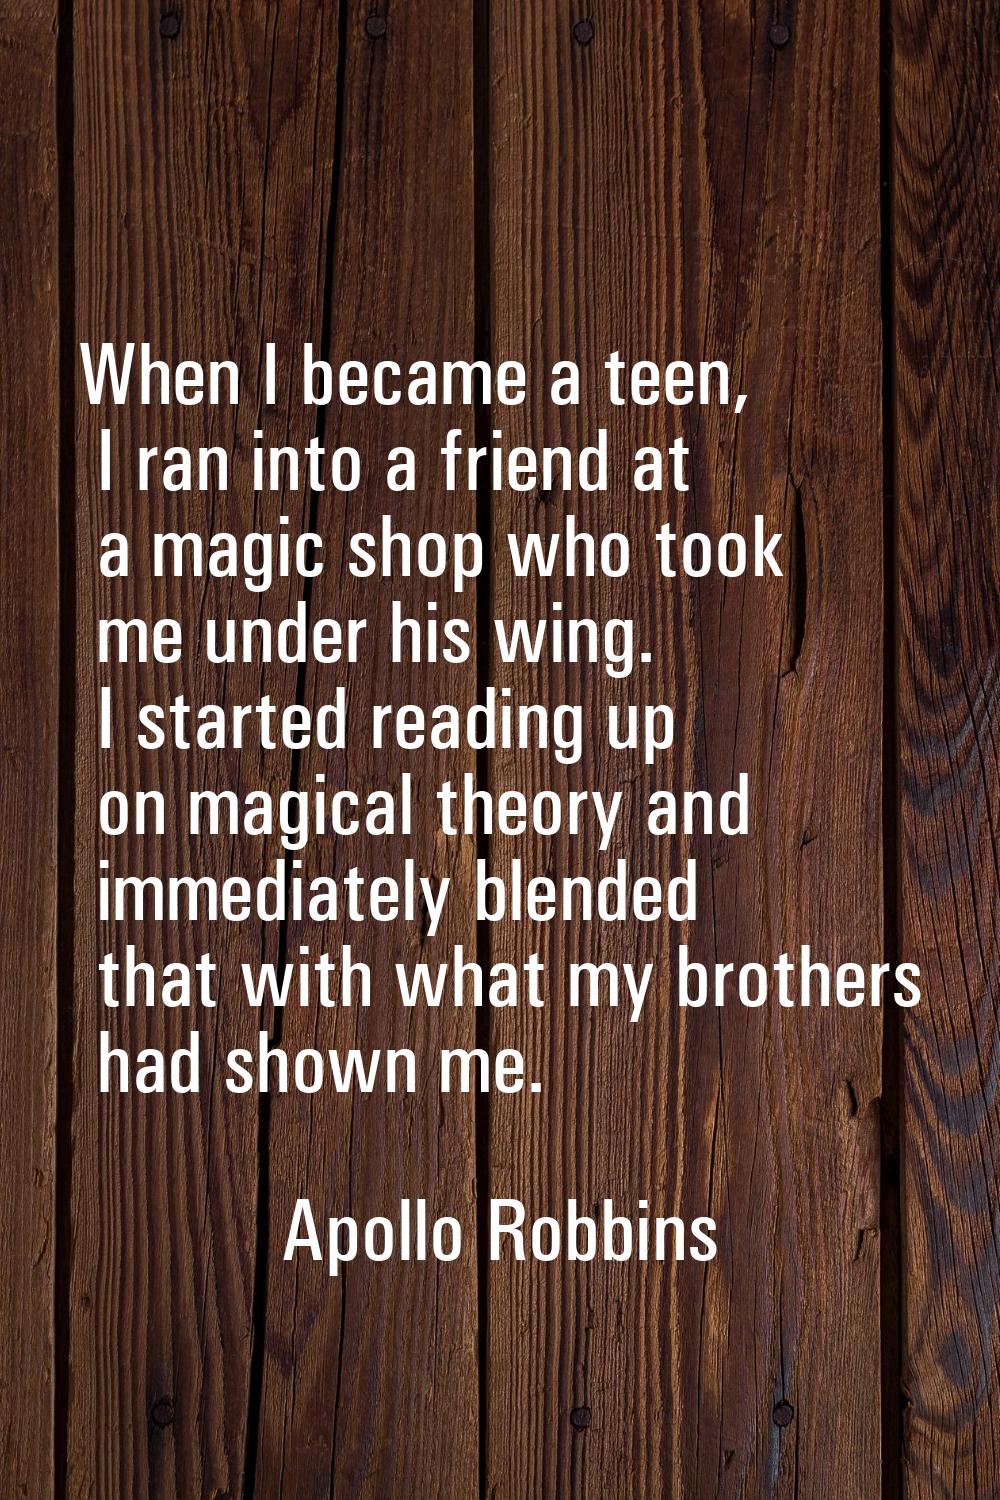 When I became a teen, I ran into a friend at a magic shop who took me under his wing. I started rea